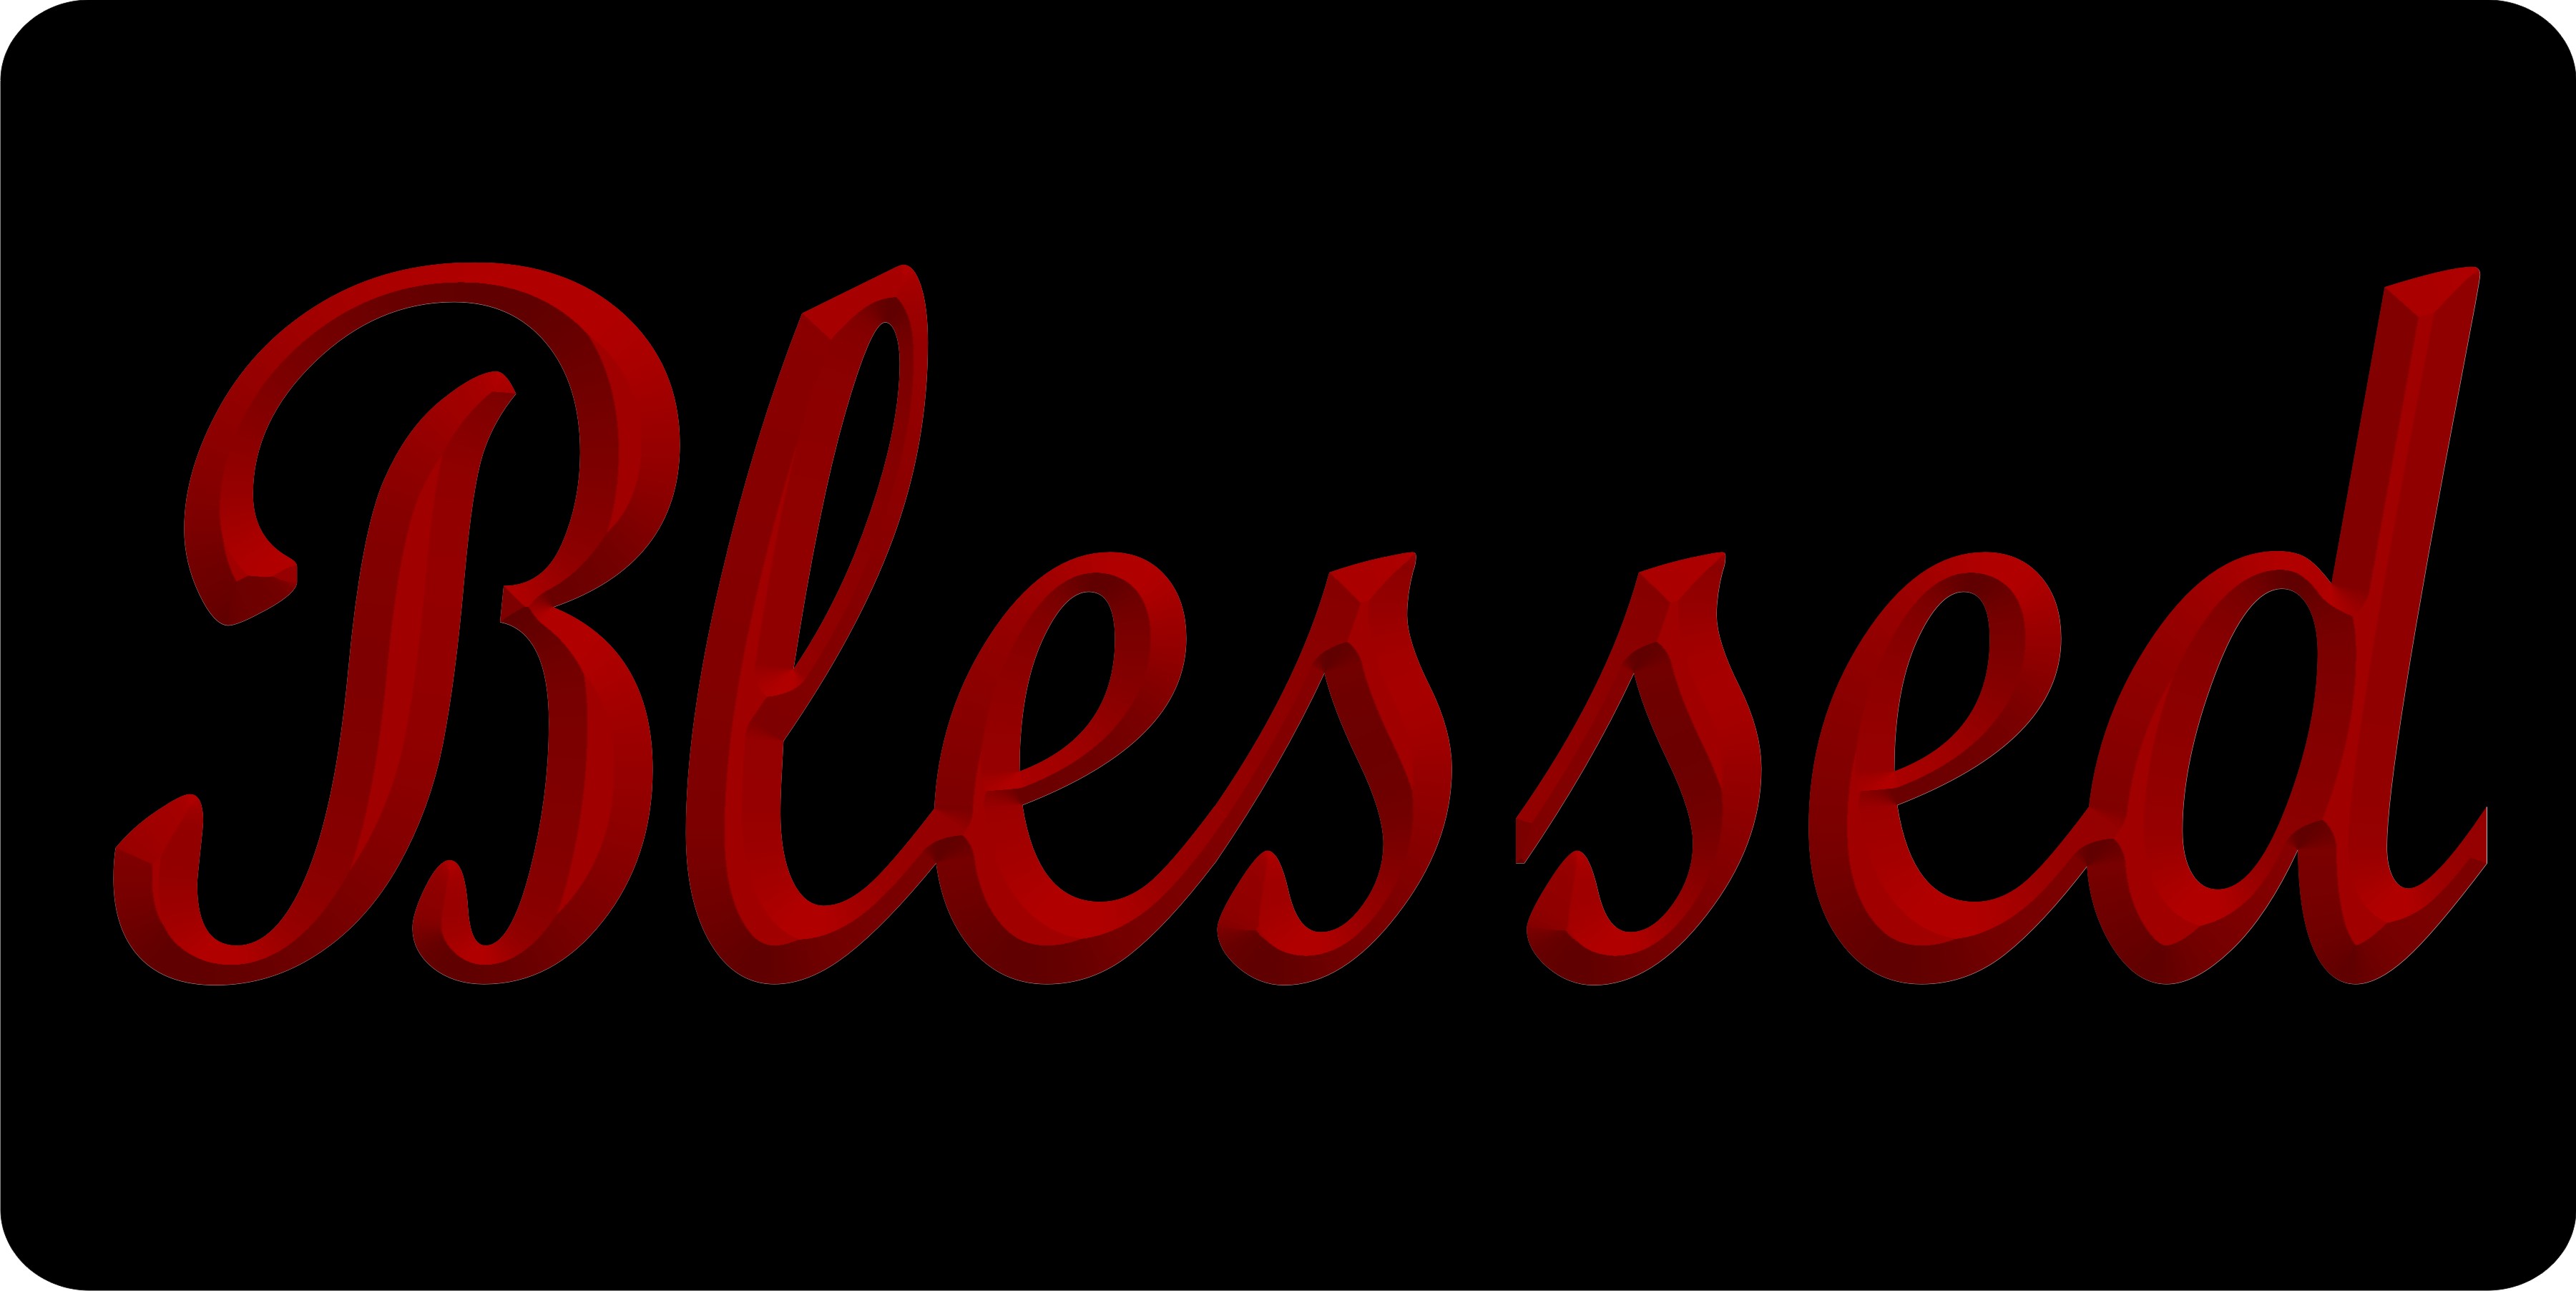 Blessed With Red Letters Photo License Plate